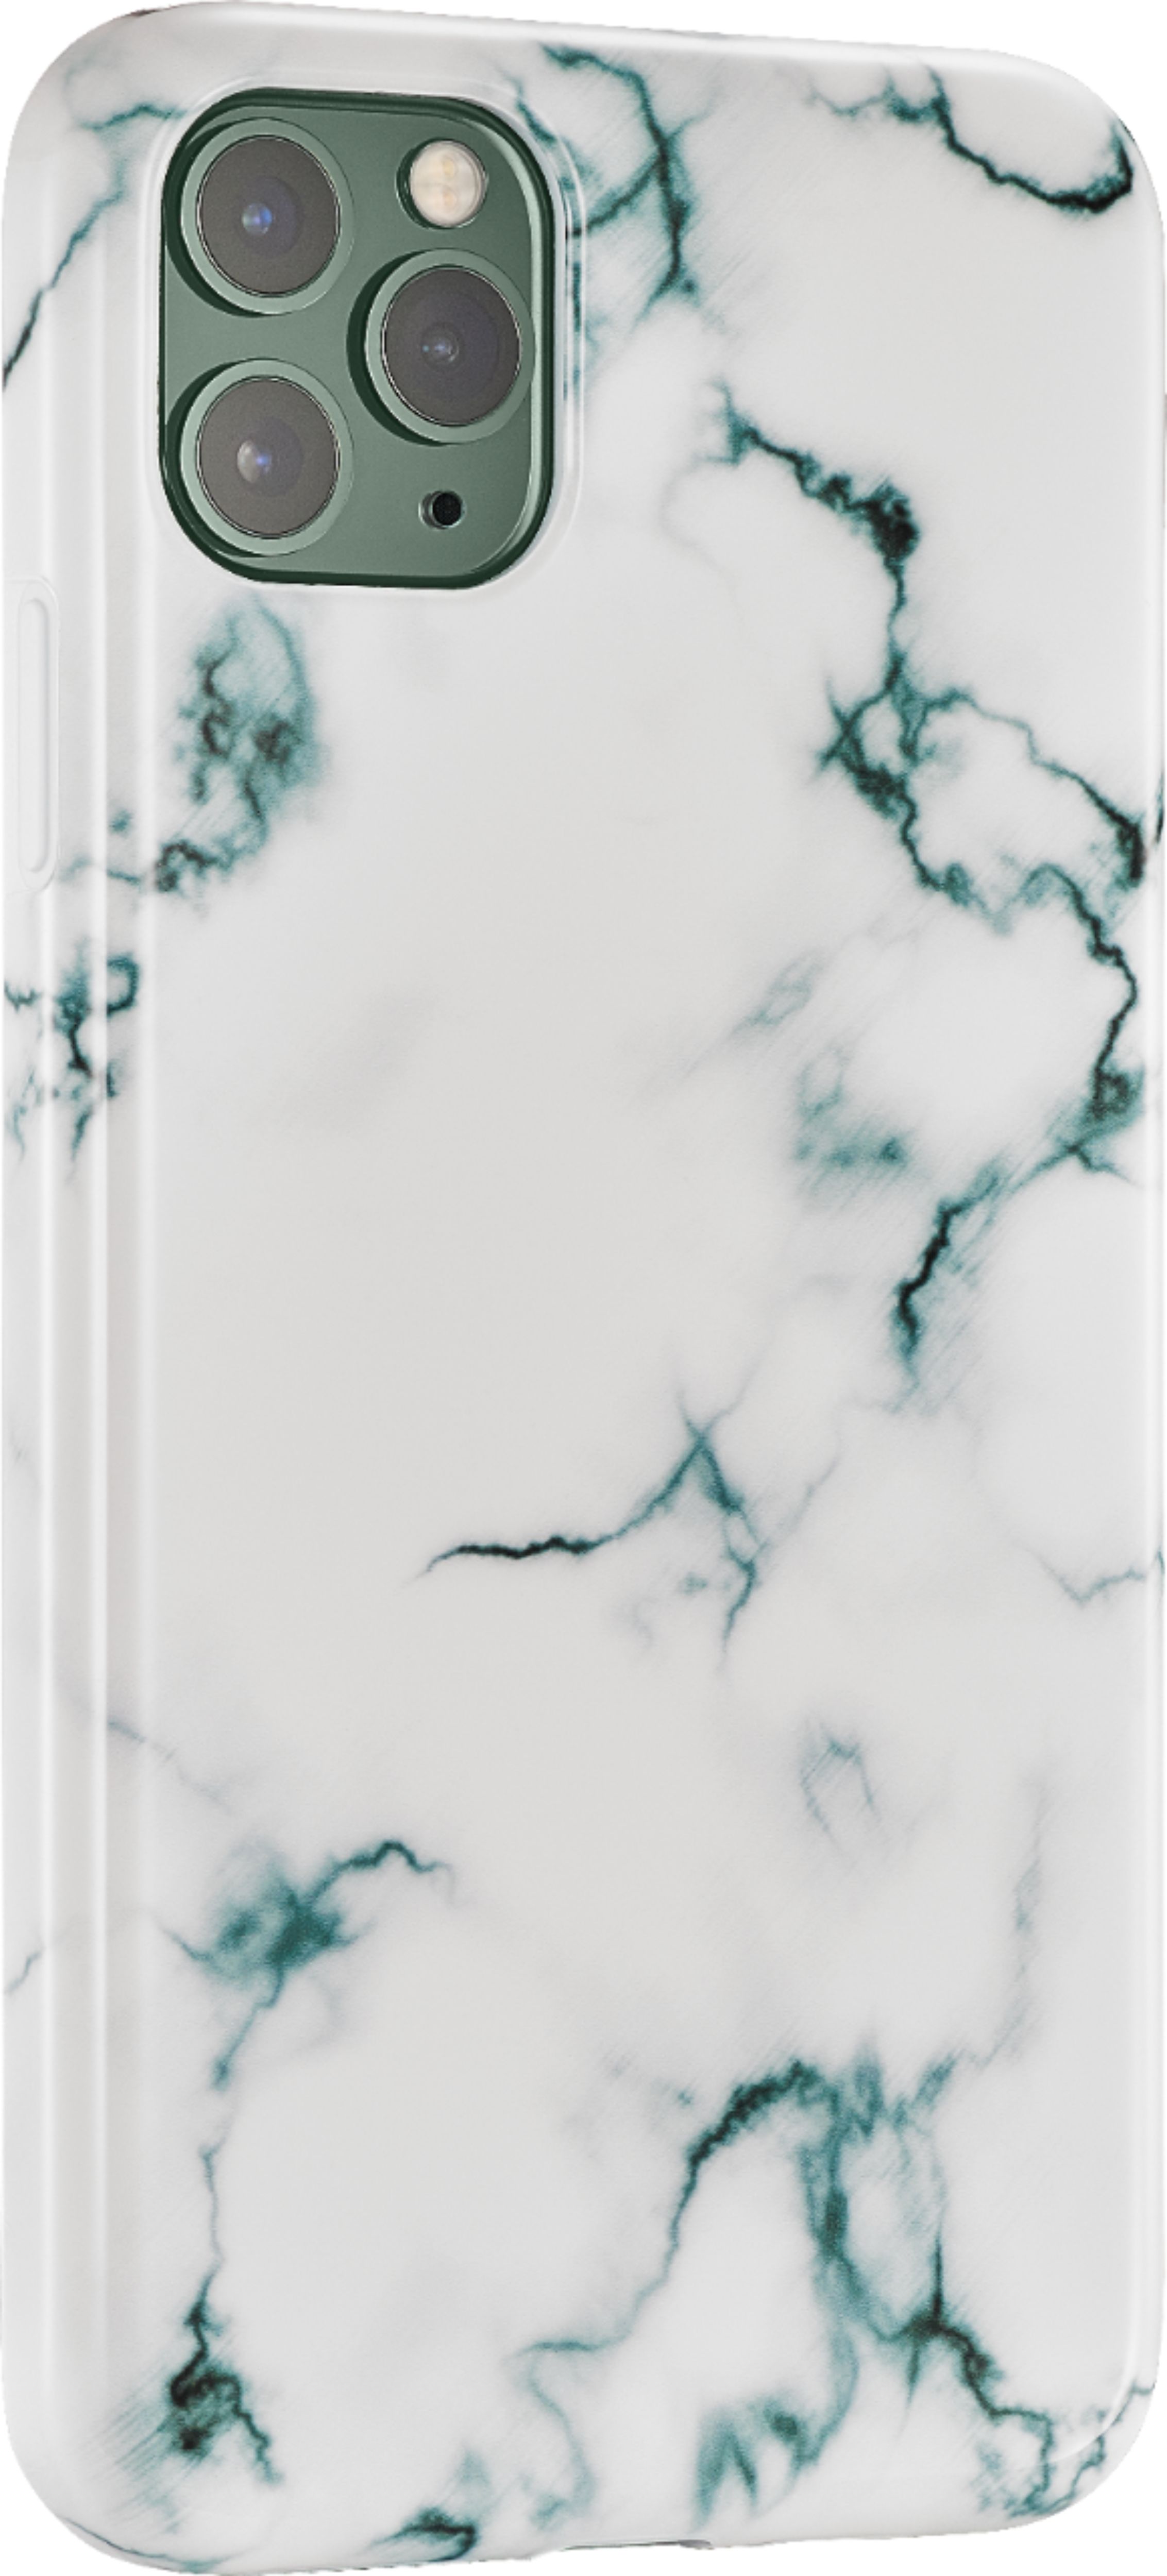 Insignia Hard Shell Case For Apple Iphone 11 Pro Max White Marble Ns Maxilmrb Best Buy